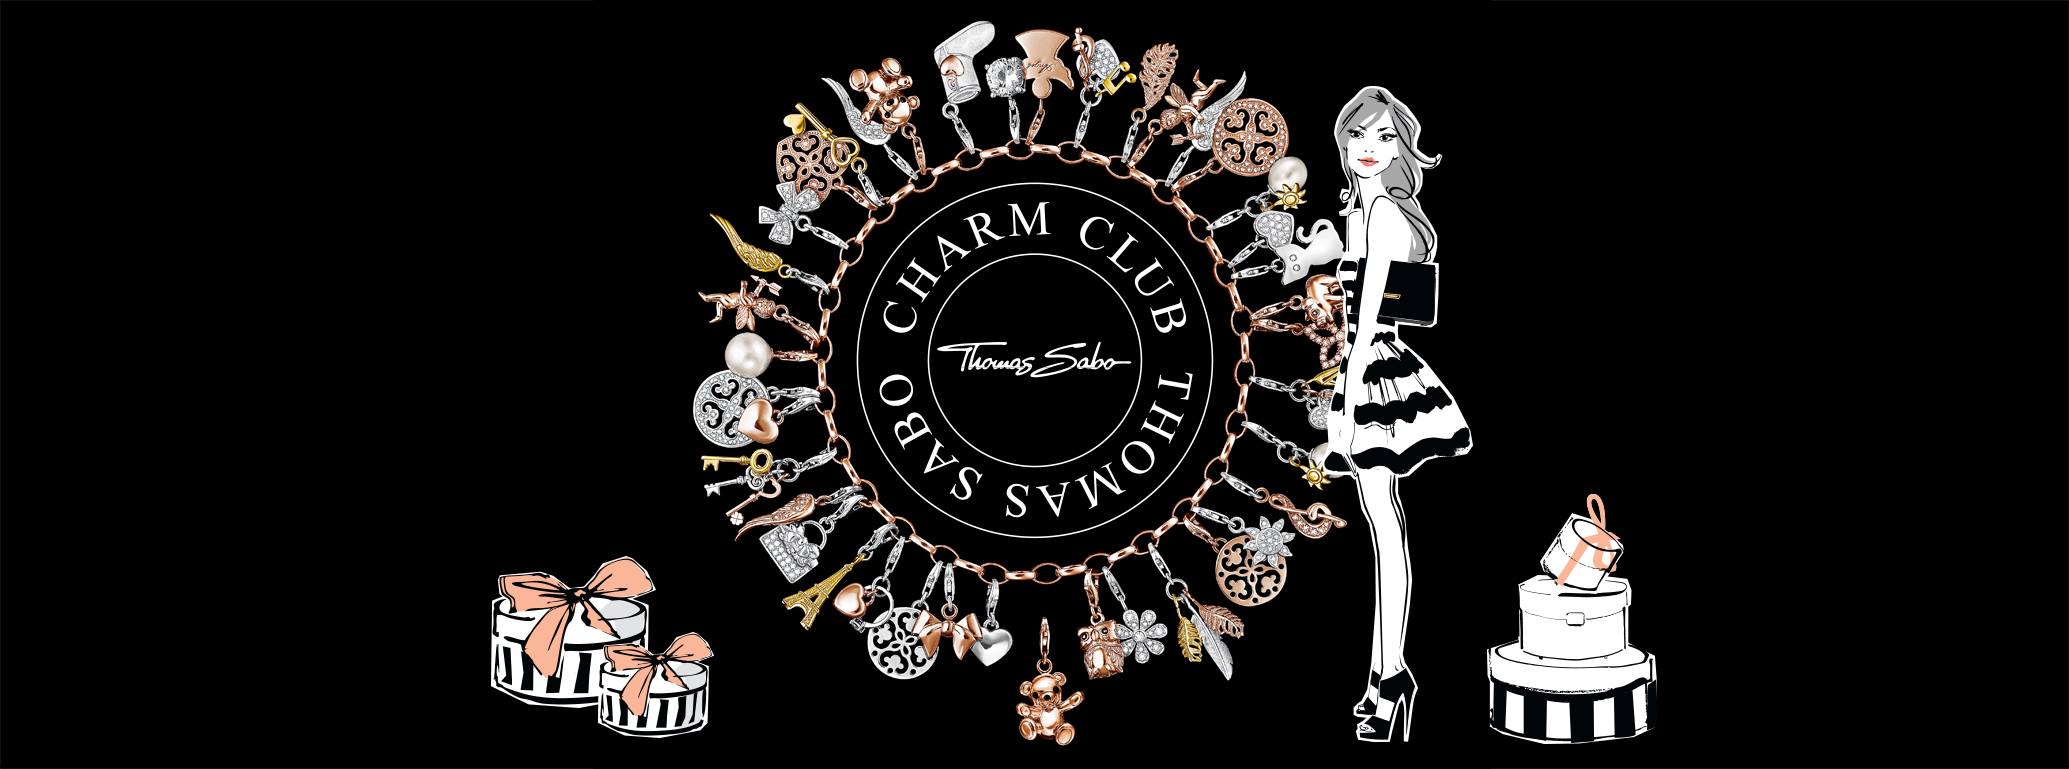 10% Off your first order when you sign up at Thomas Sabo